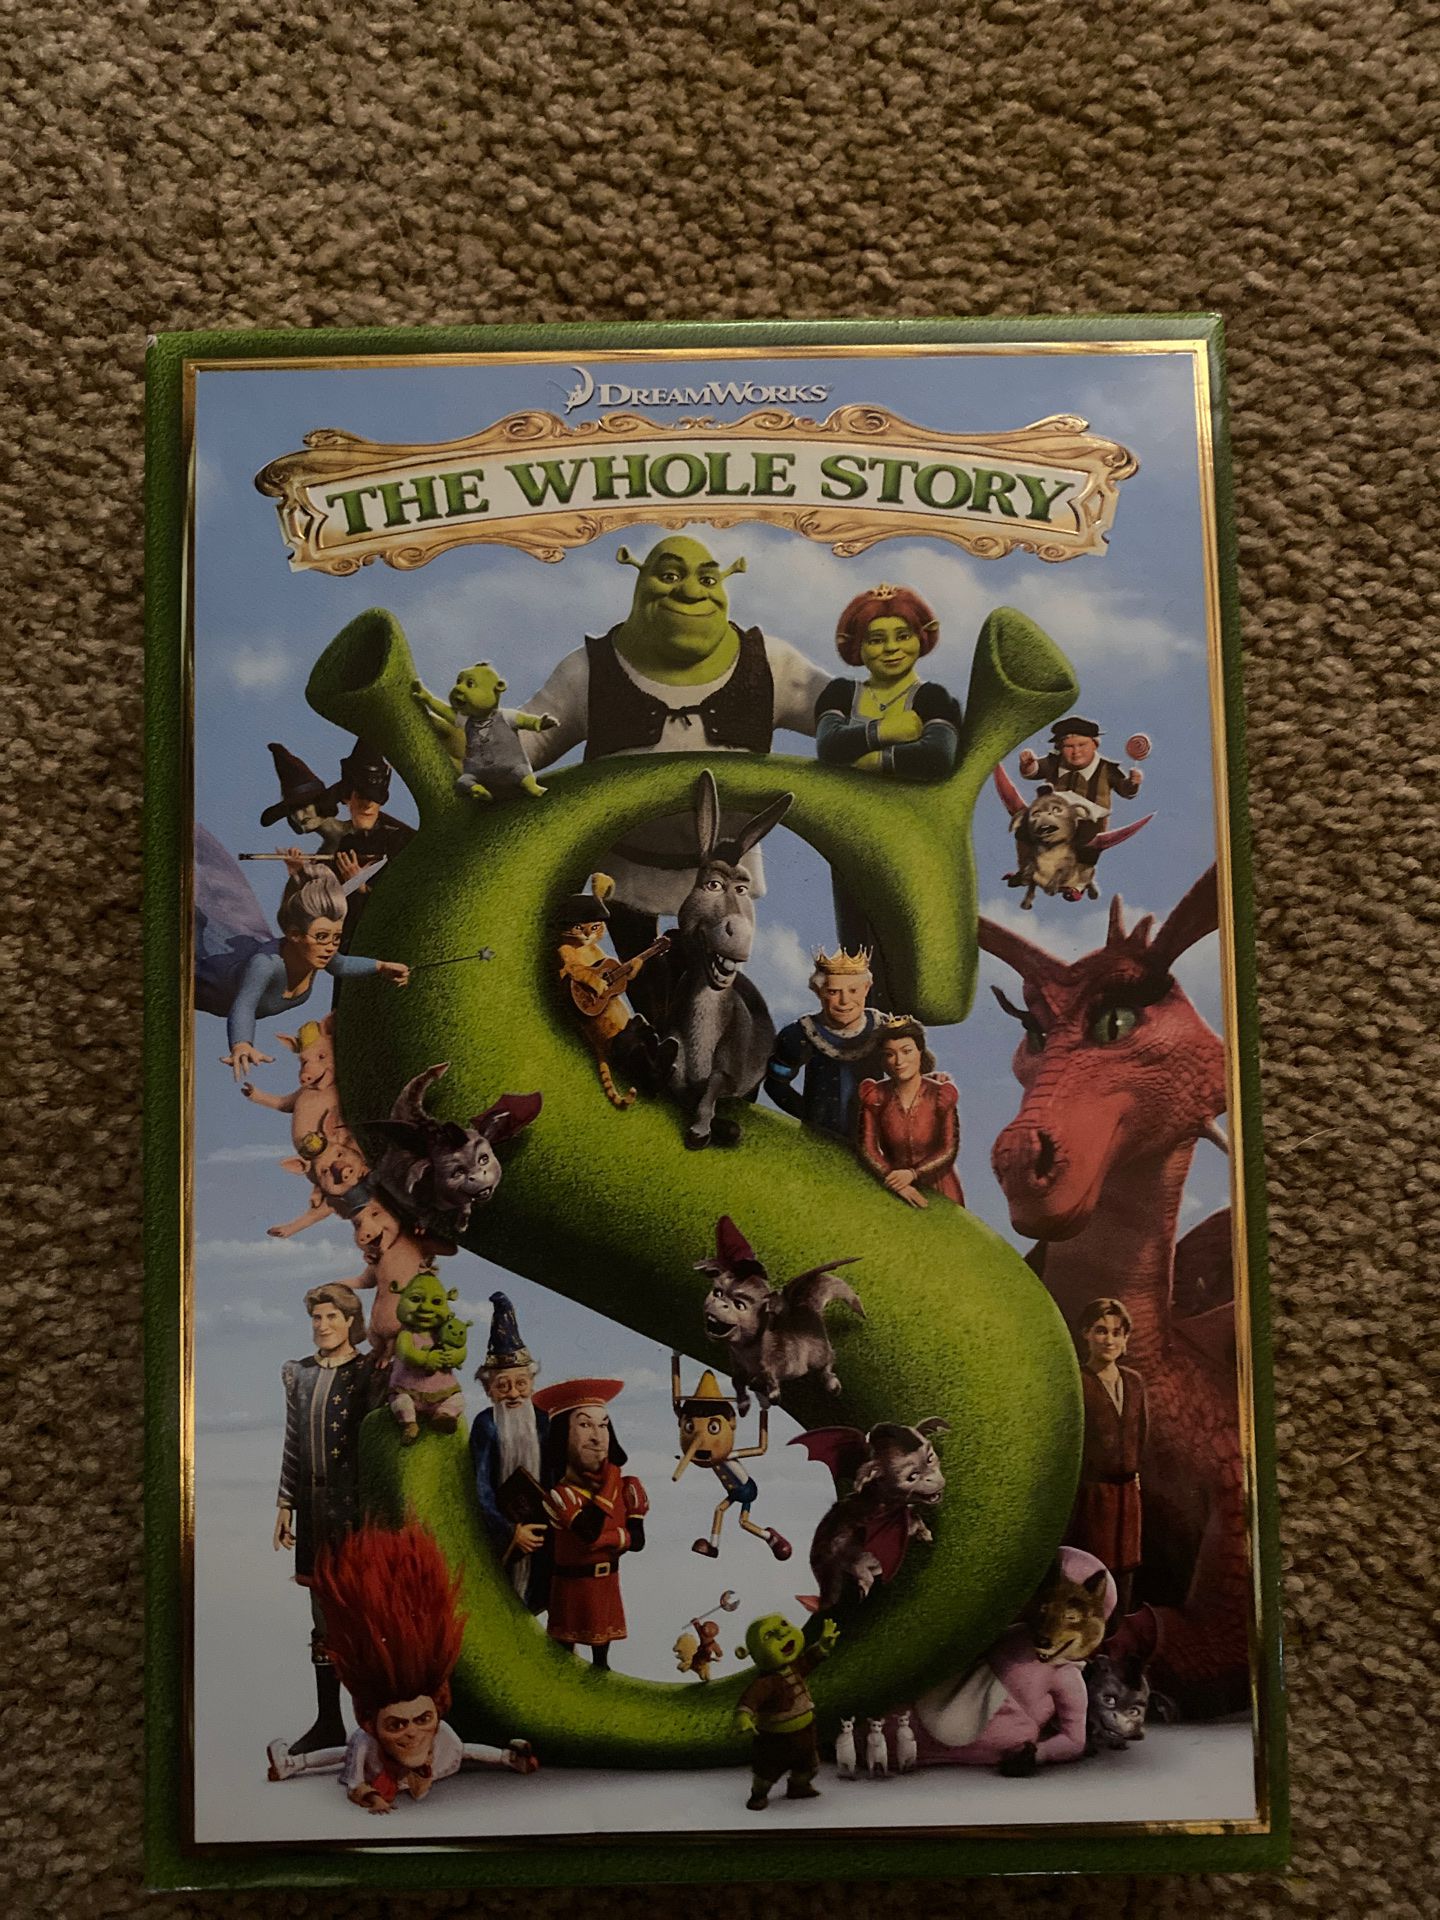 Shrek - The Whole Story 4 Movie Collection